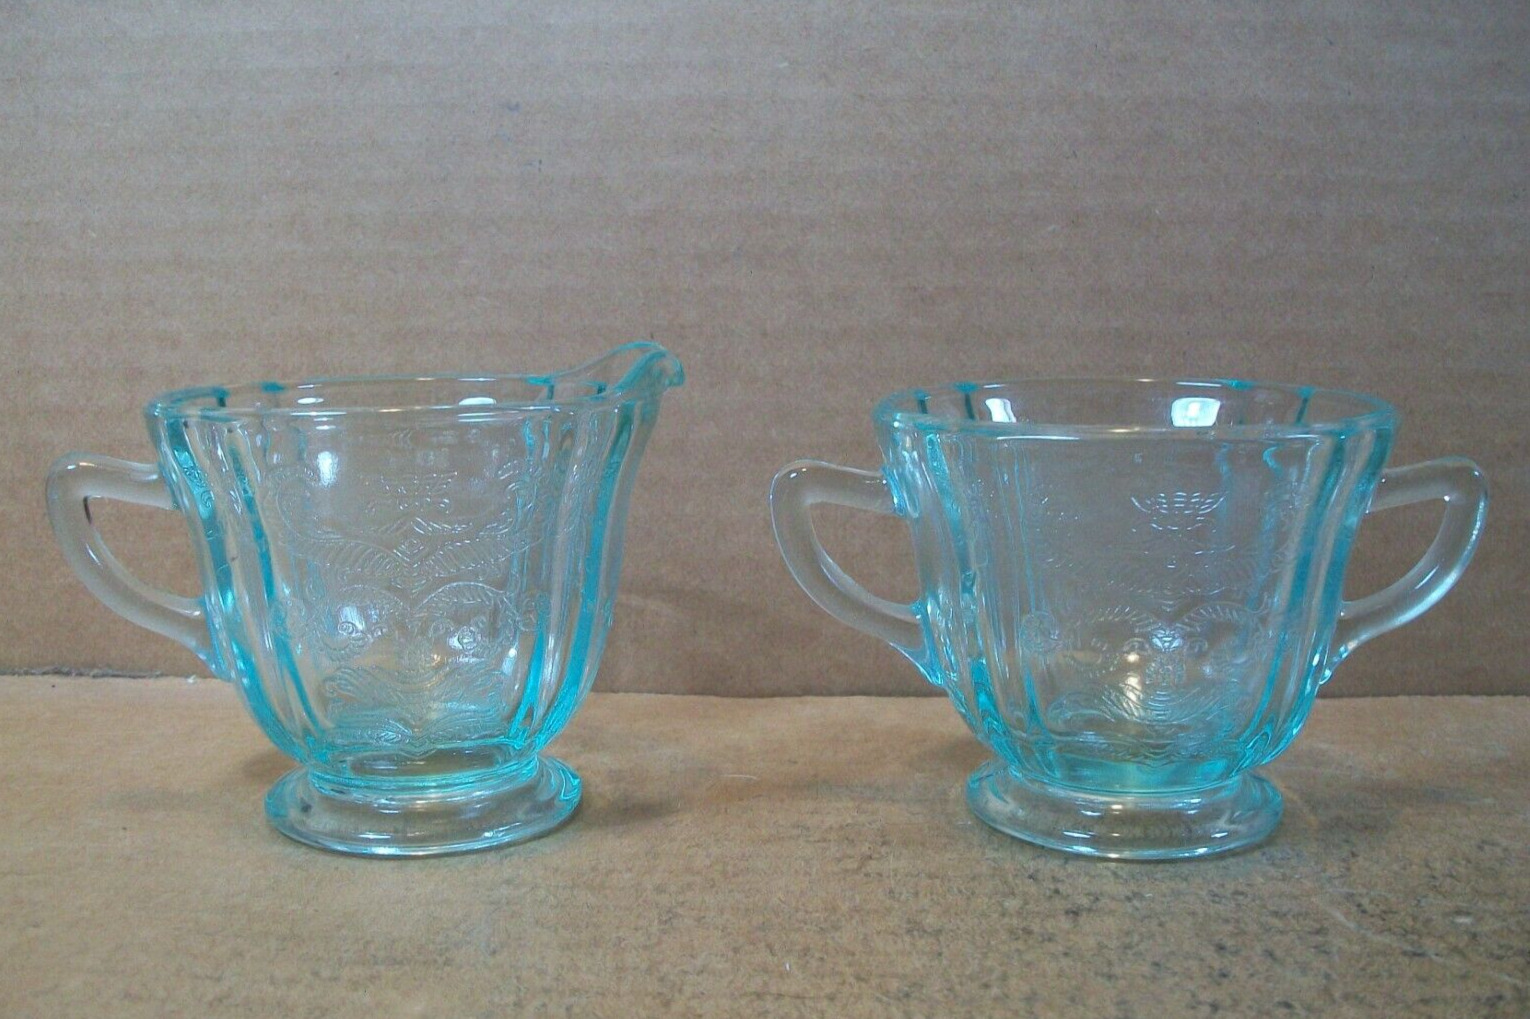 Vintage Indiana Glass Recollection Madrid Teal Aqua Cream and Sugar Set